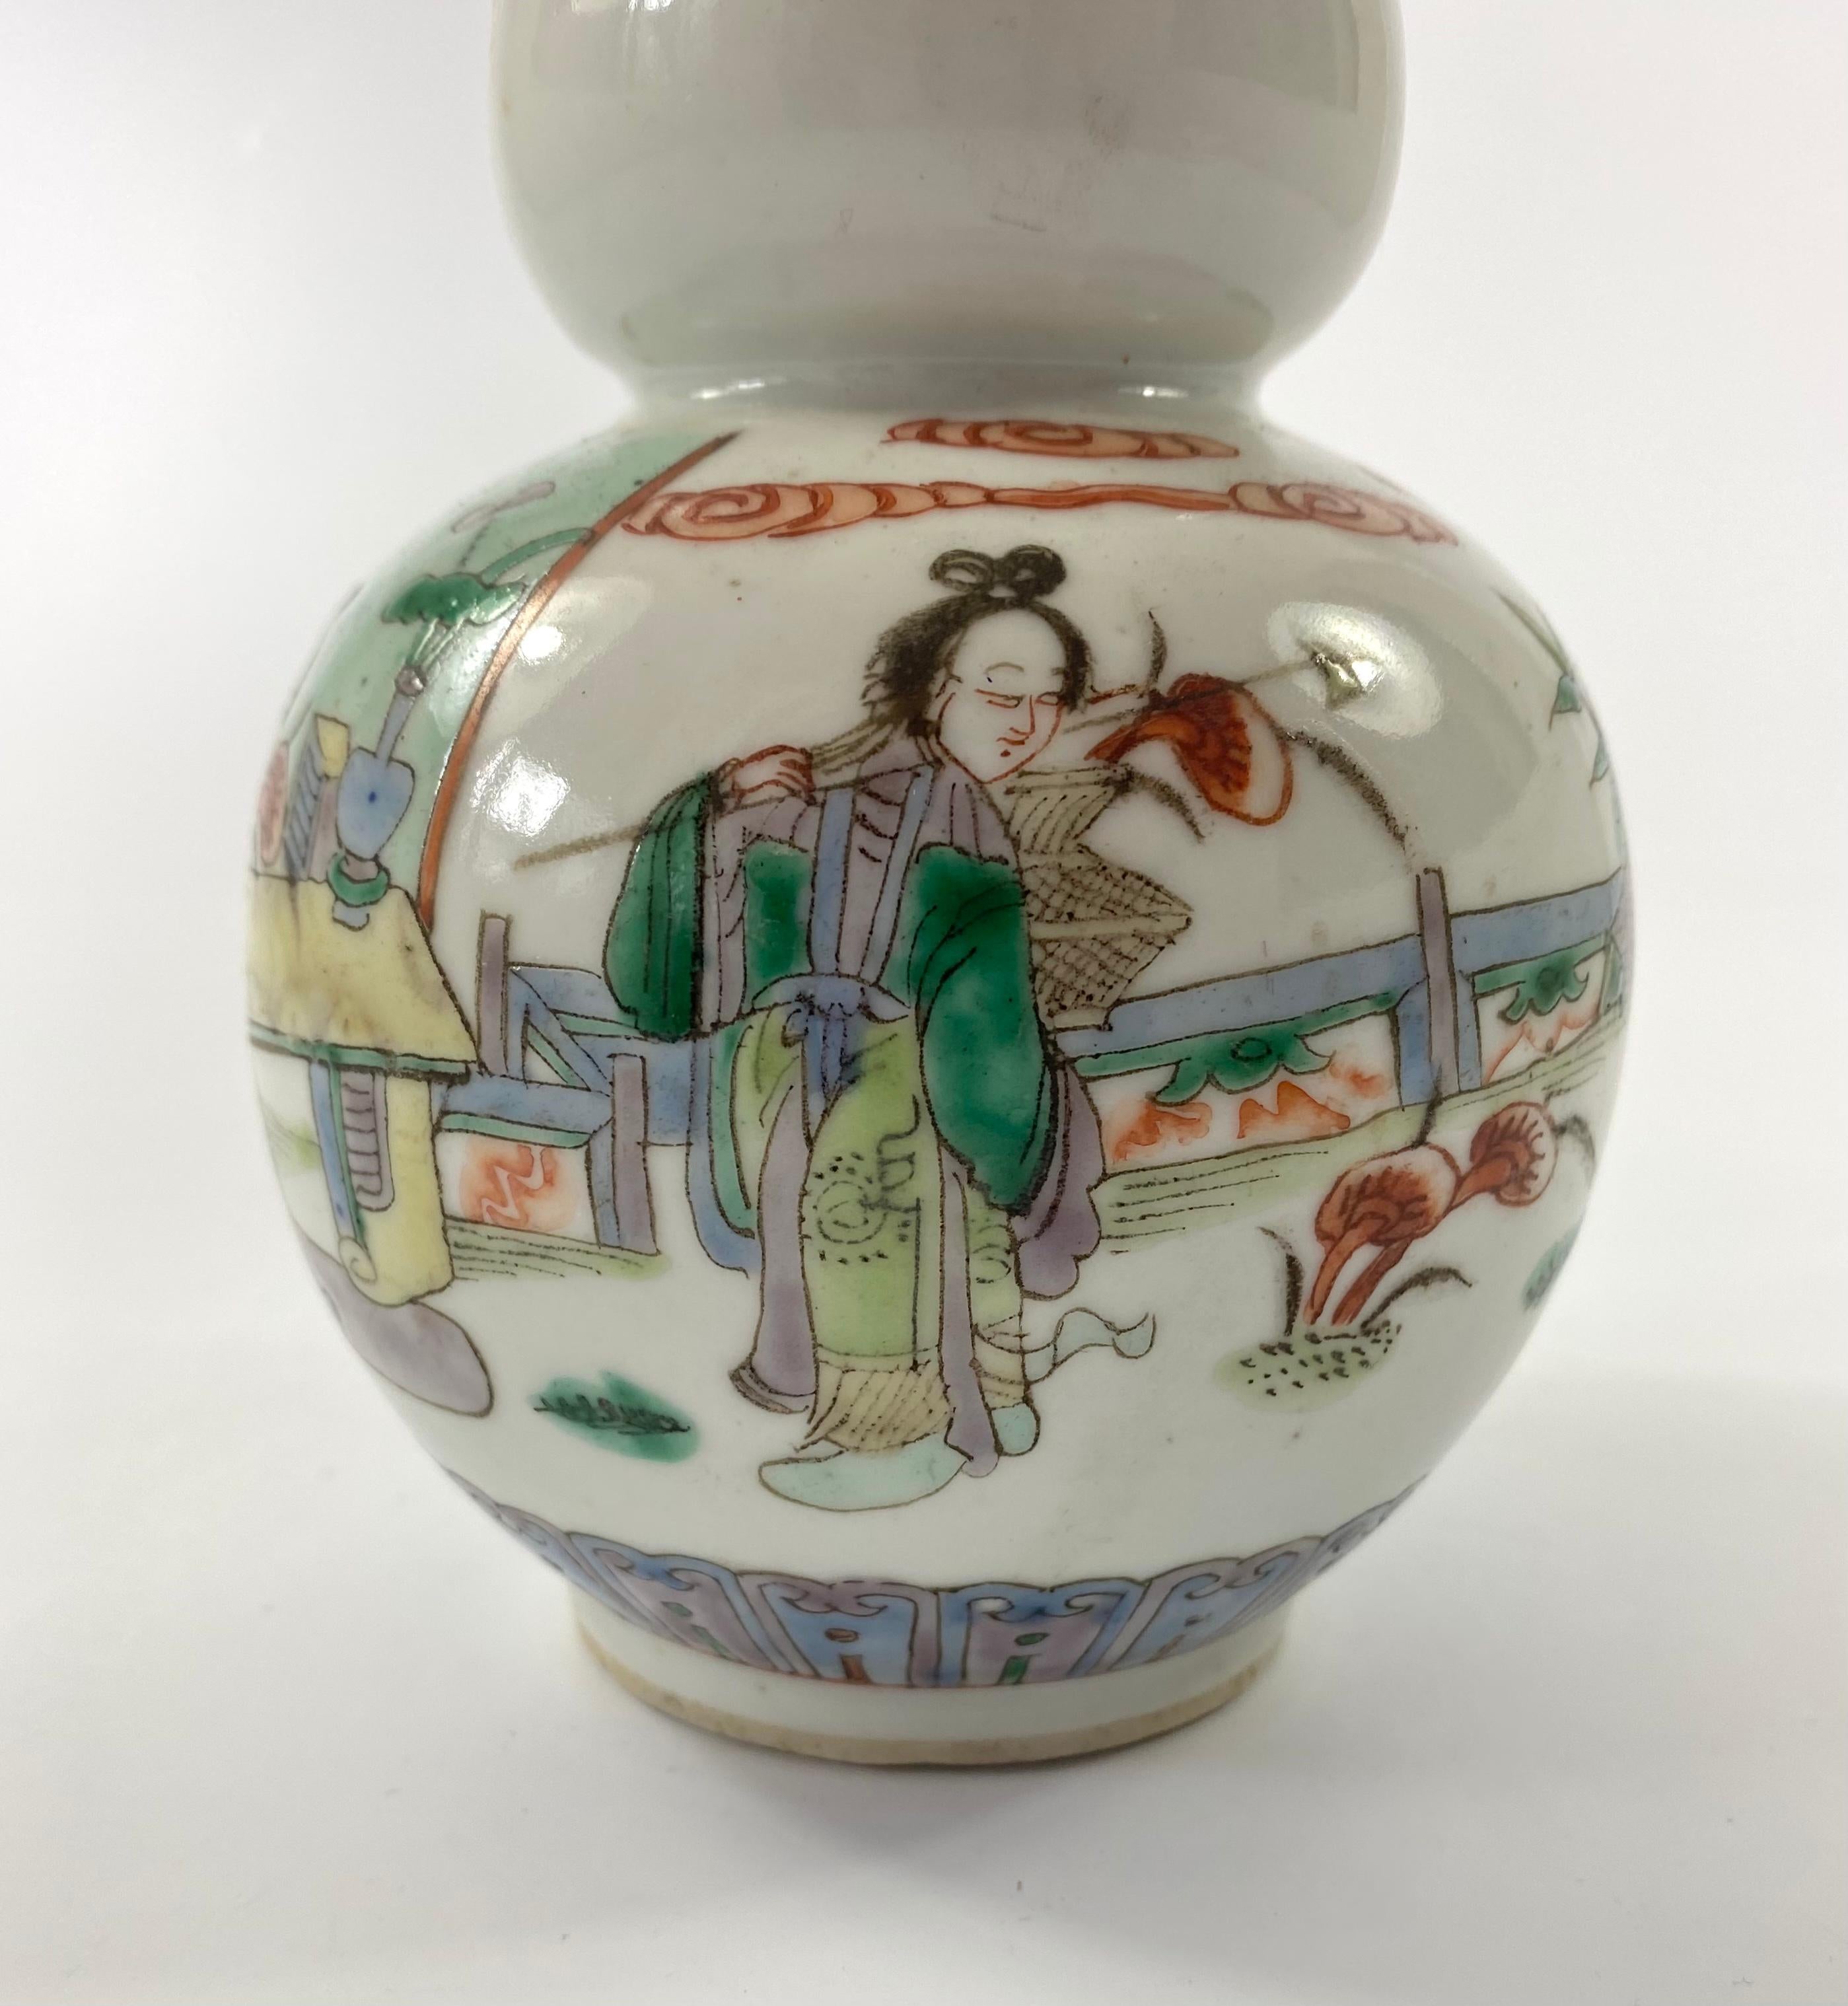 Late 19th Century Chinese Porcelain Double Gourd Vase, Famille Verte, c. 1880, Qing Dynasty